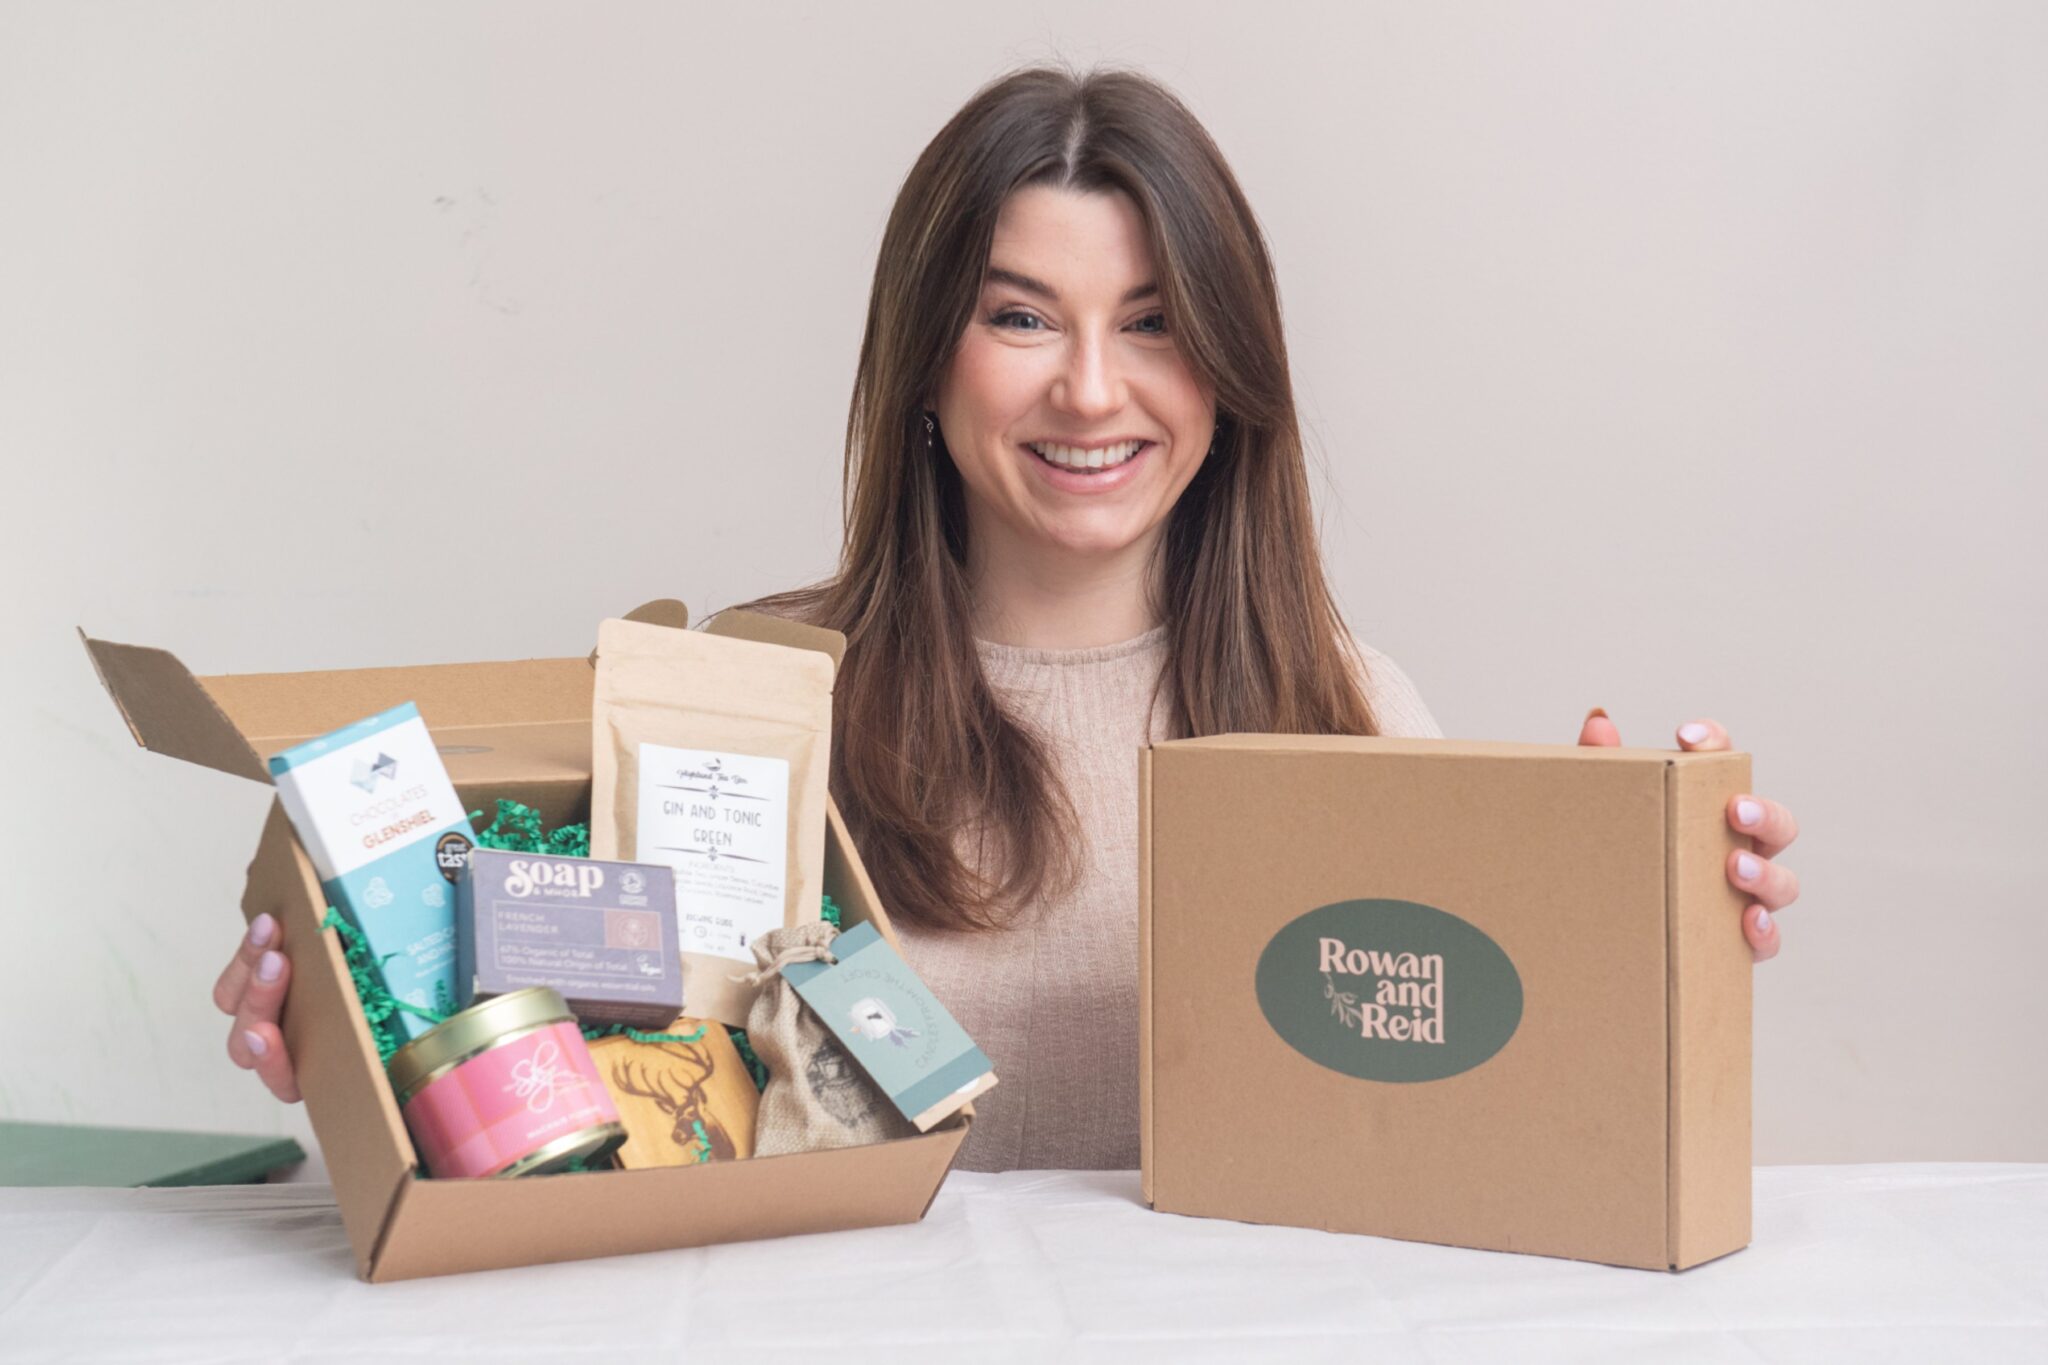 Rowan and Reid: Highland subscription box to launch next month